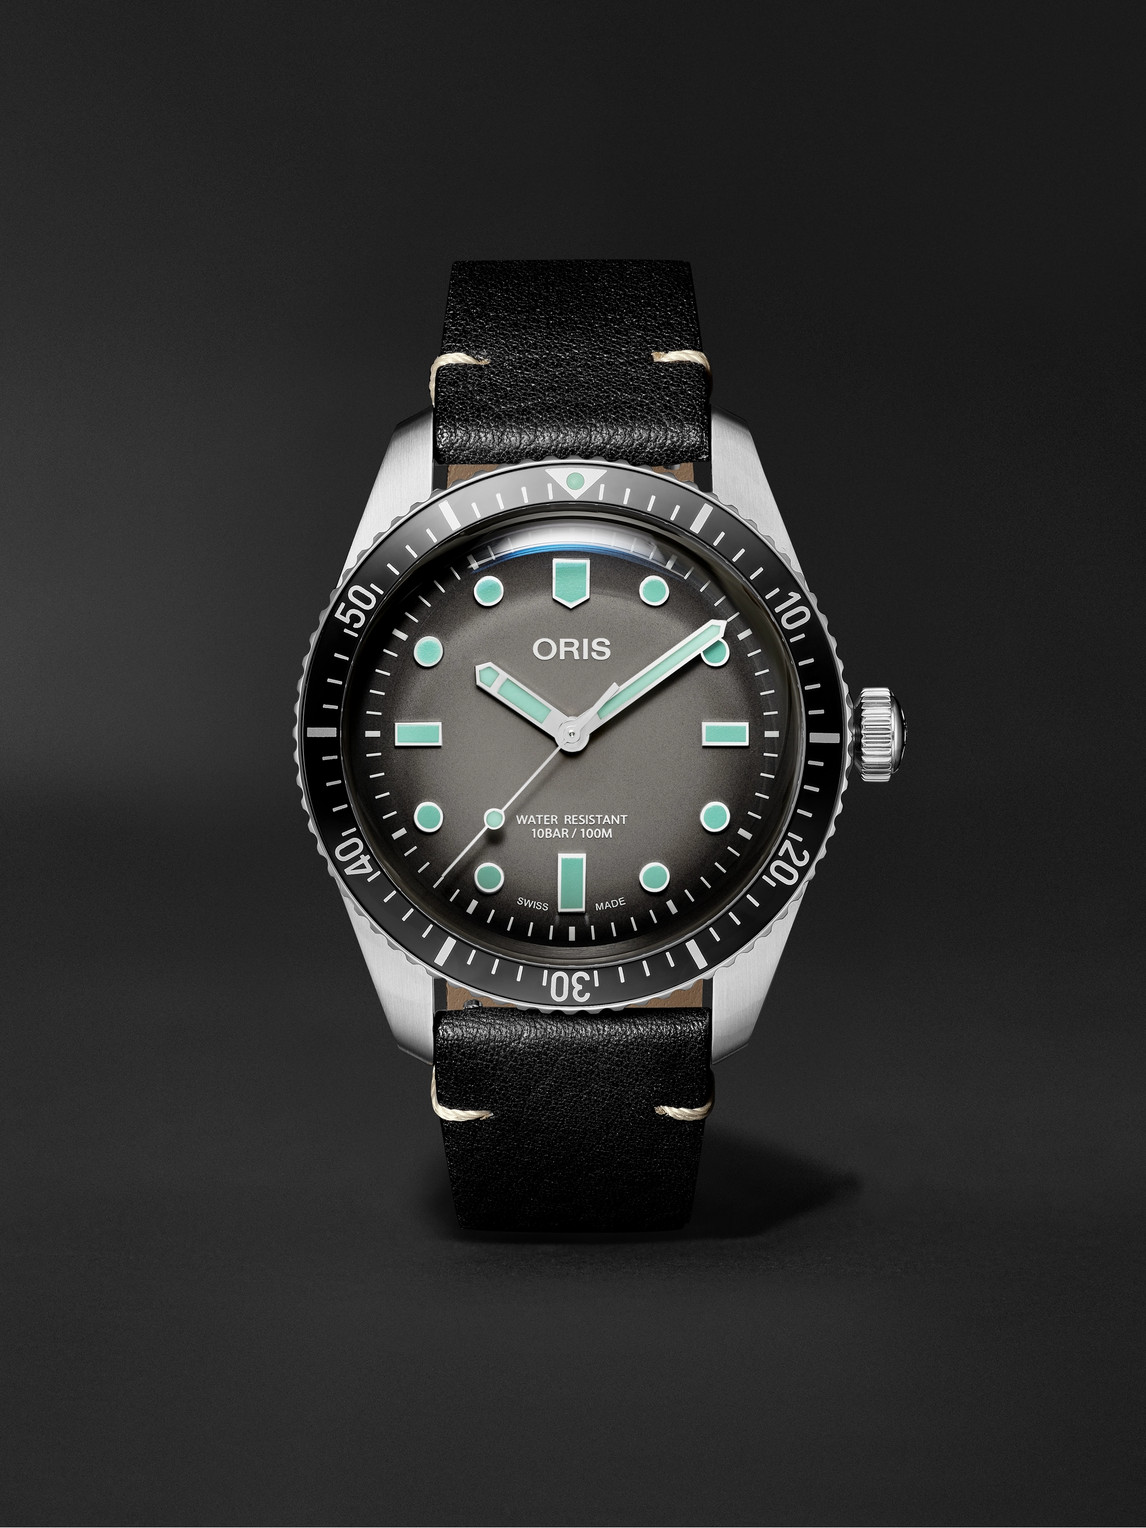 Divers Sixty-Five Automatic 40mm Stainless Steel and Leather Watch, Ref. No. 01 733 7707 4053-07 5 20 89